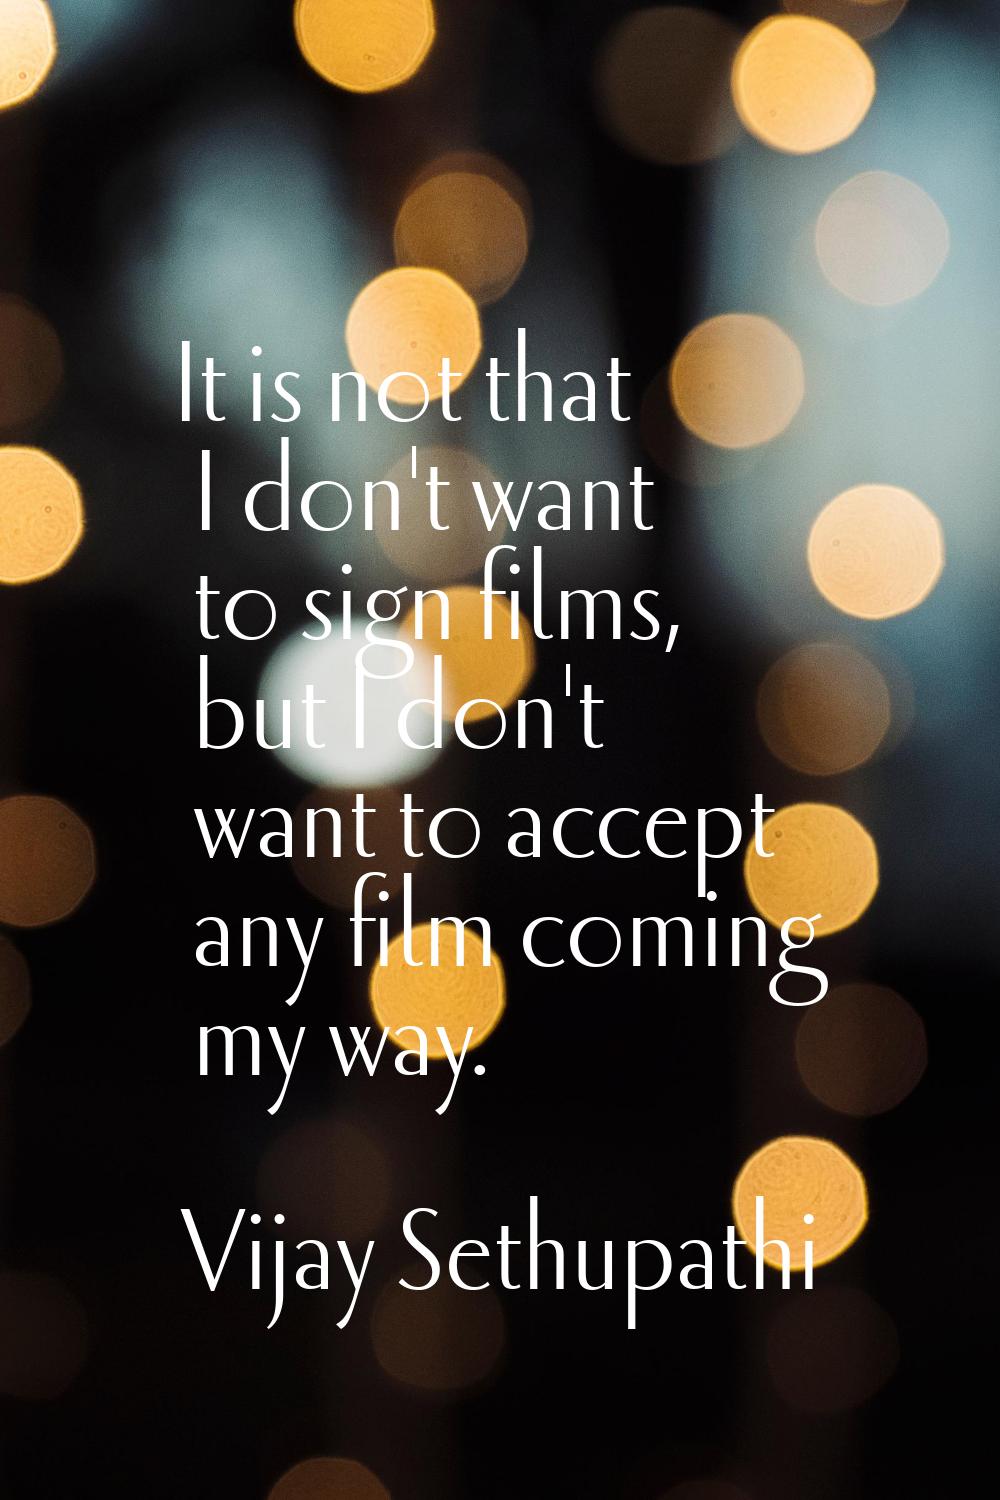 It is not that I don't want to sign films, but I don't want to accept any film coming my way.